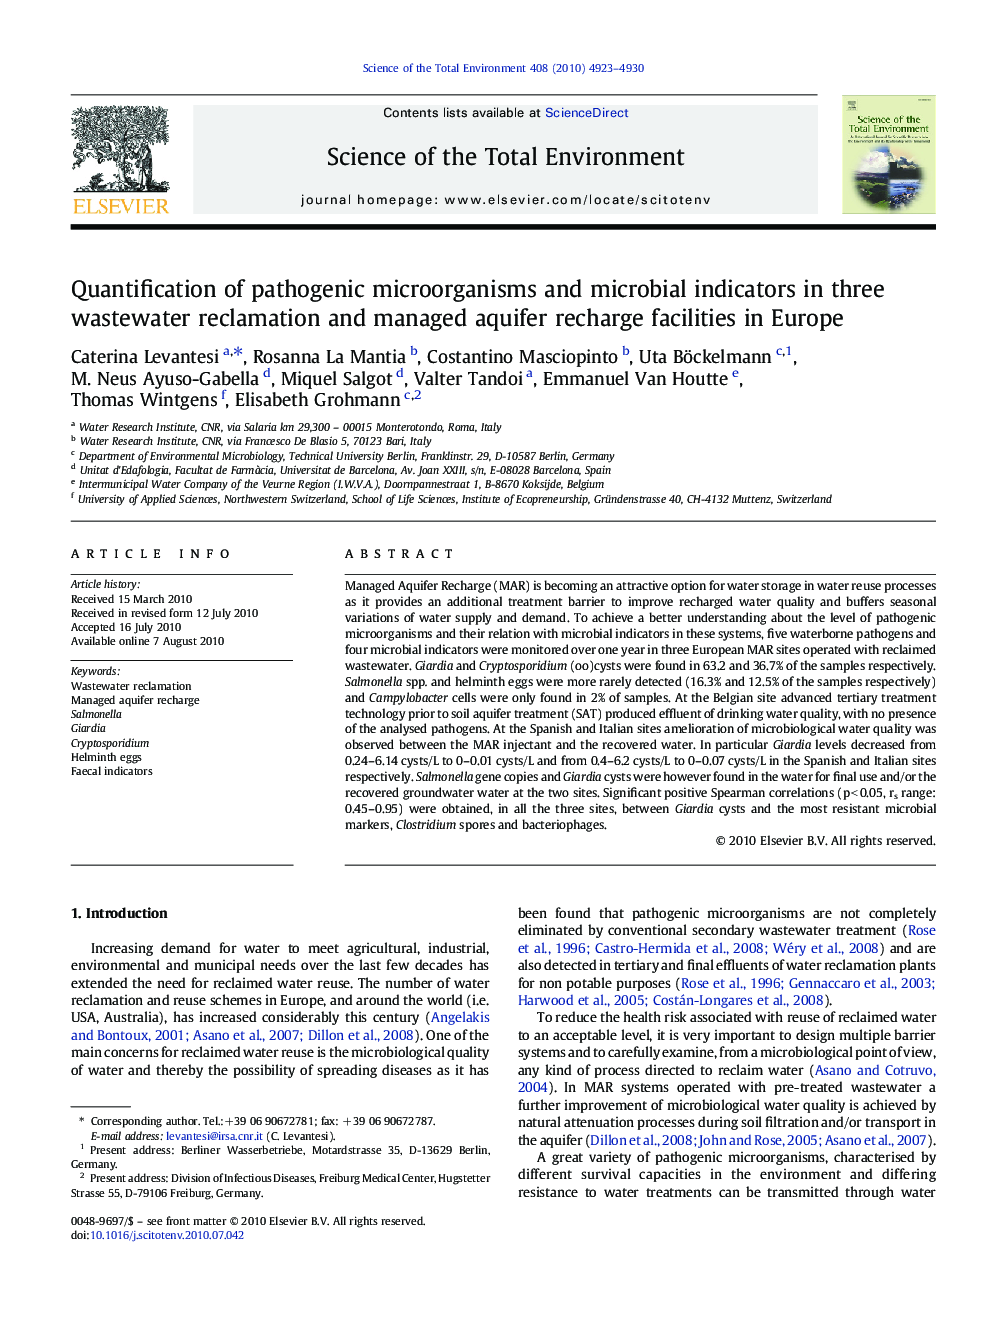 Quantification of pathogenic microorganisms and microbial indicators in three wastewater reclamation and managed aquifer recharge facilities in Europe